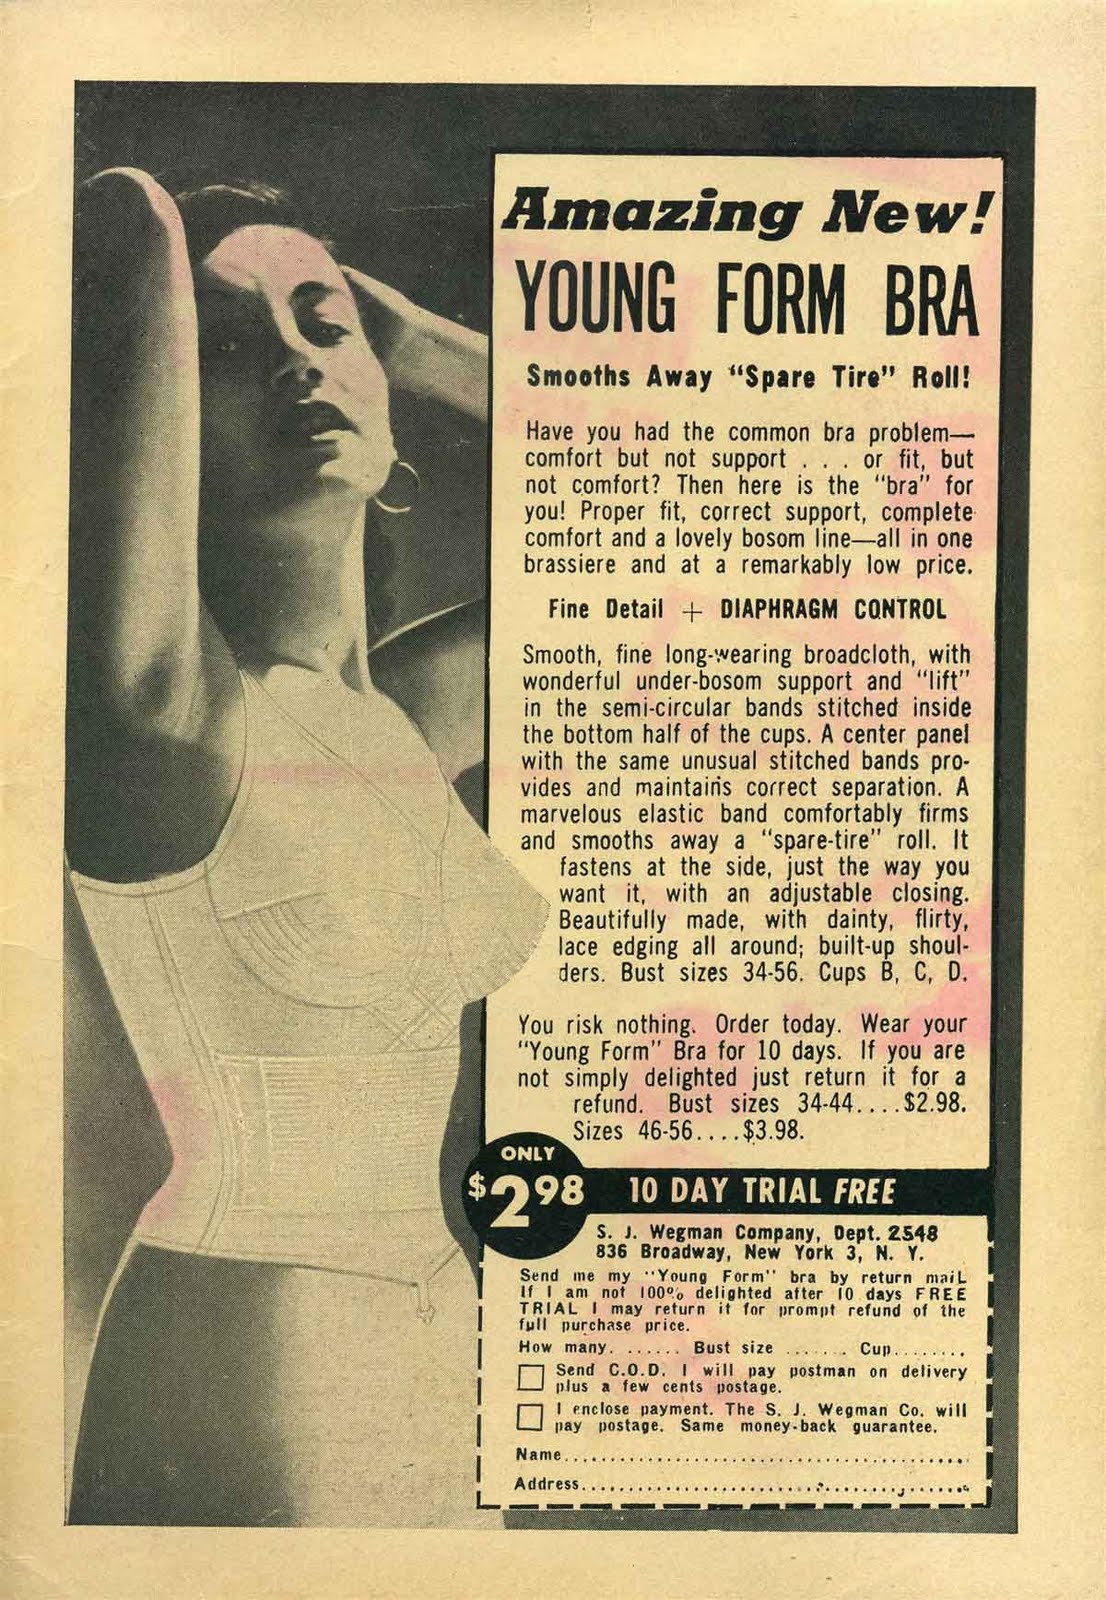 1000+ images about vintage ads on Pinterest | Girdles, Vintage ads and ...